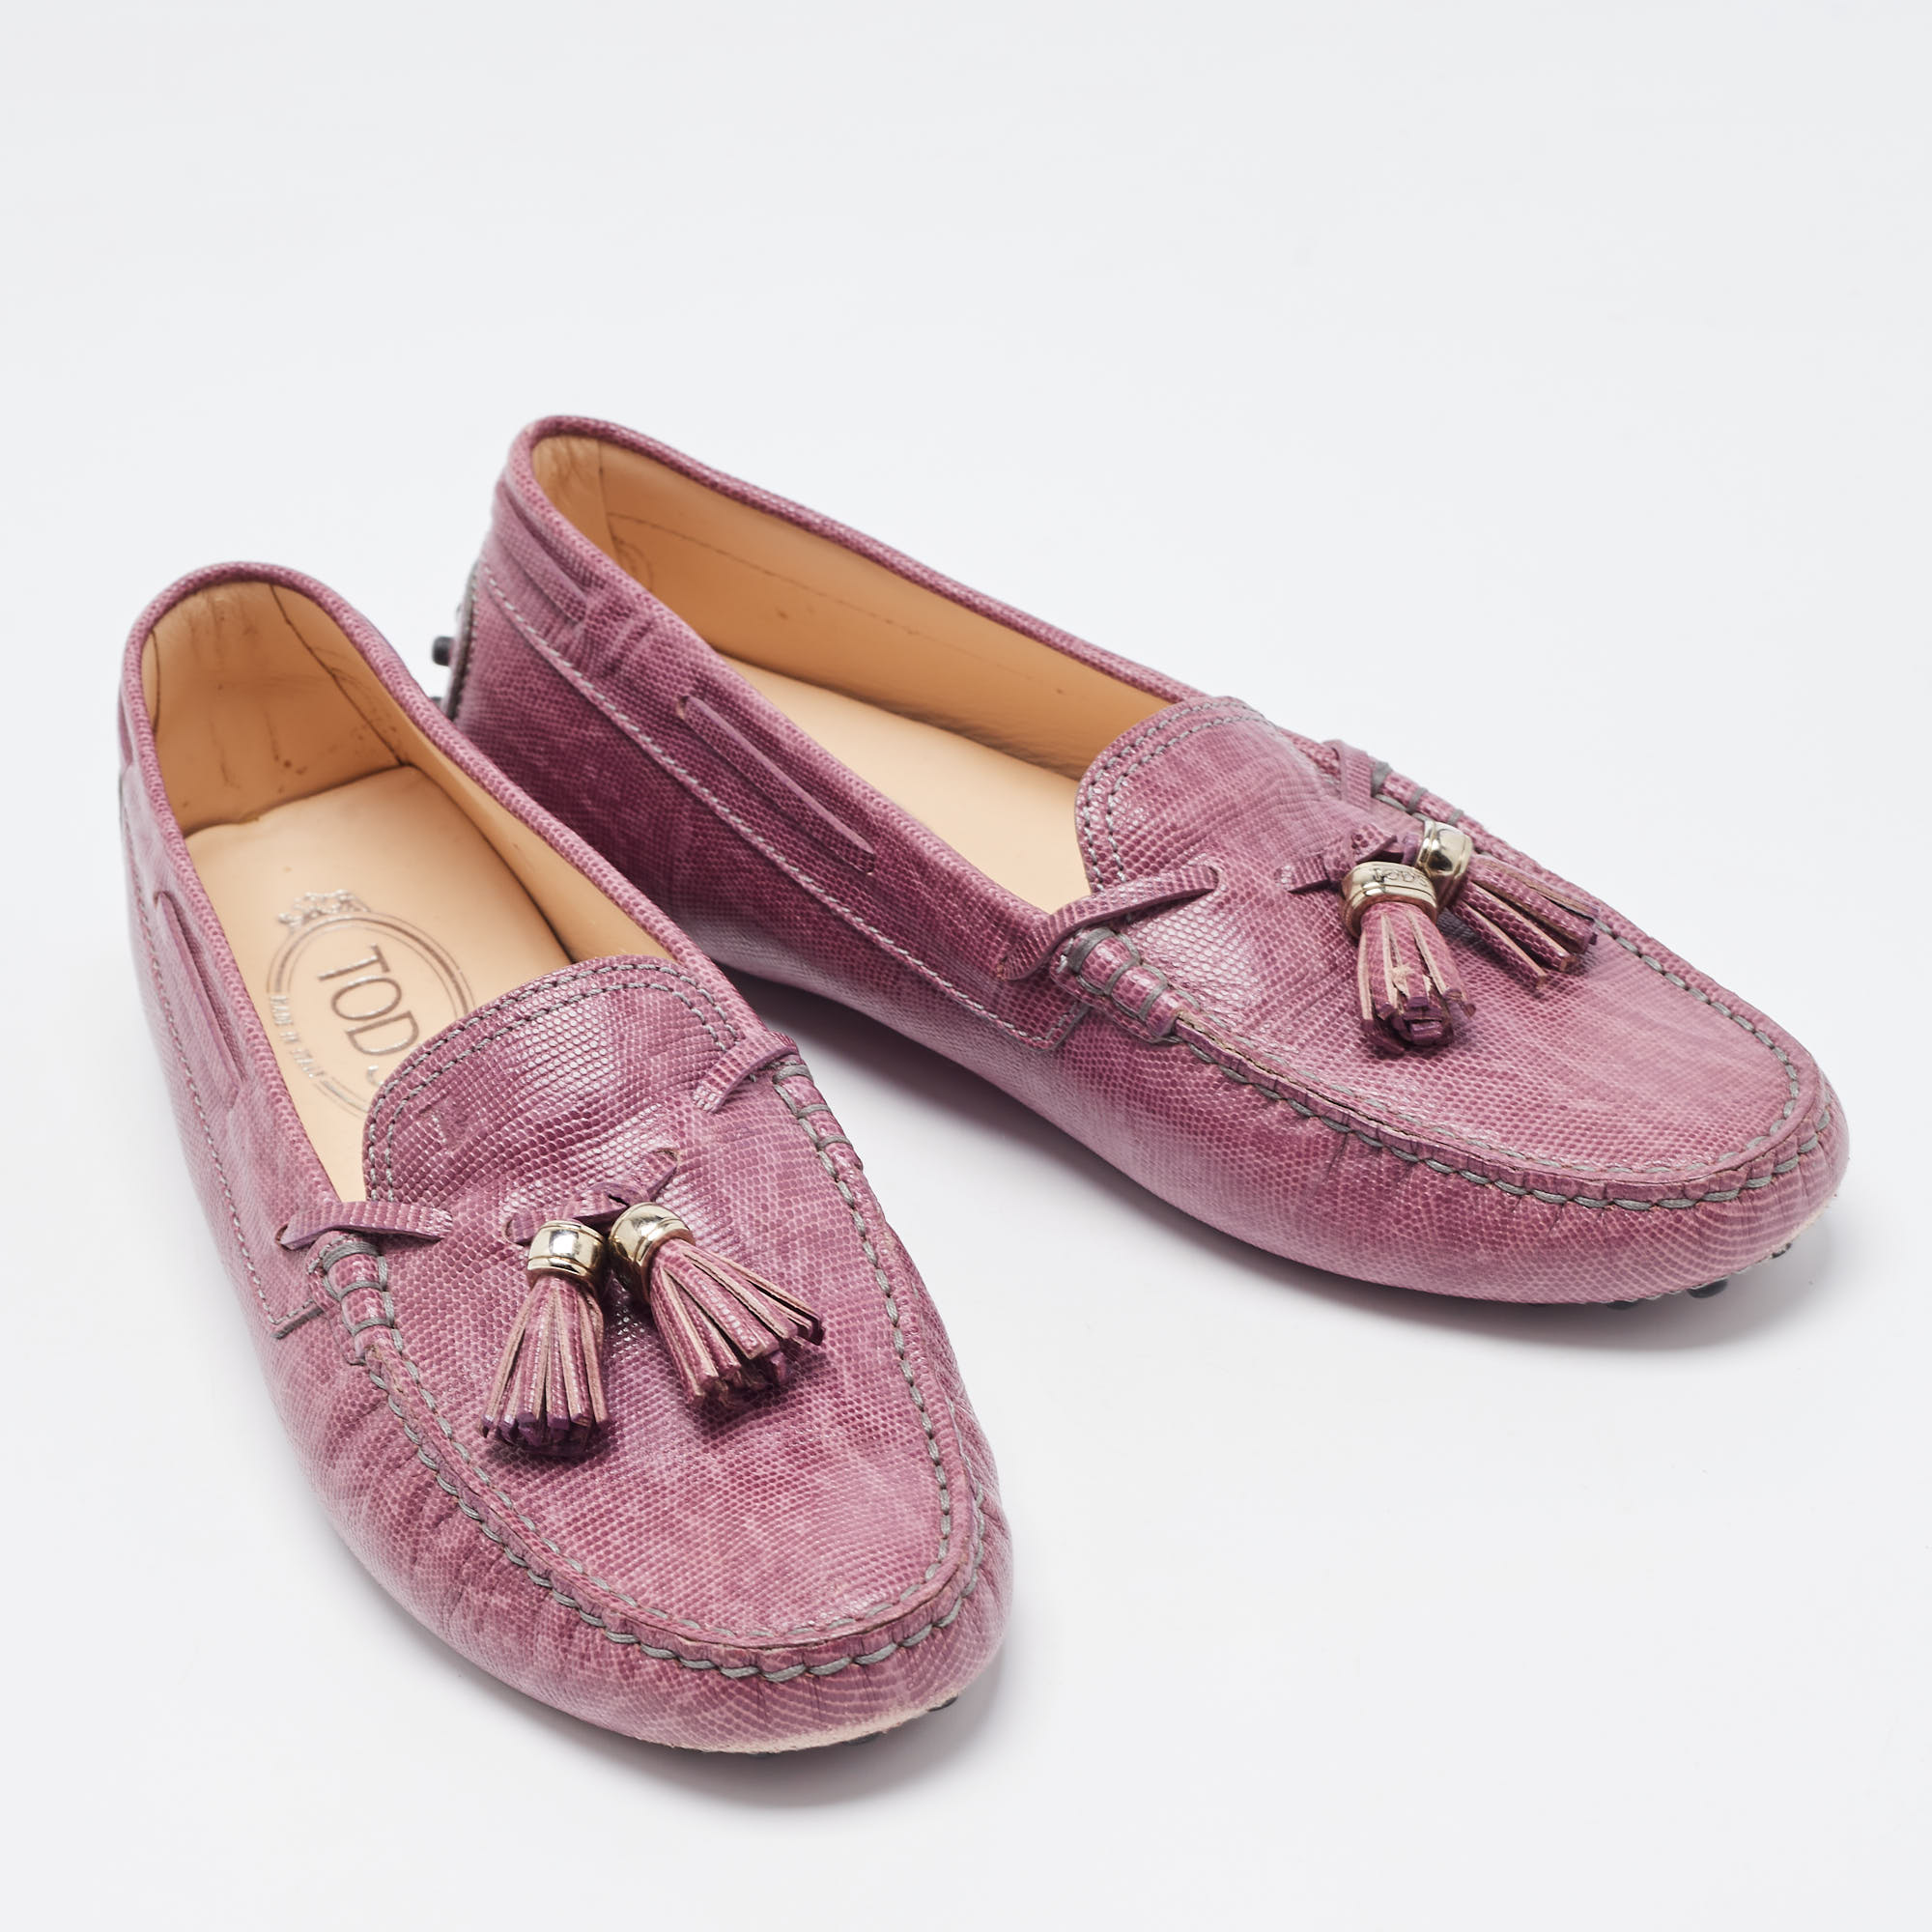 Tod's Purple Lizard Embossed Leather Penny Bow Loafers Size 39